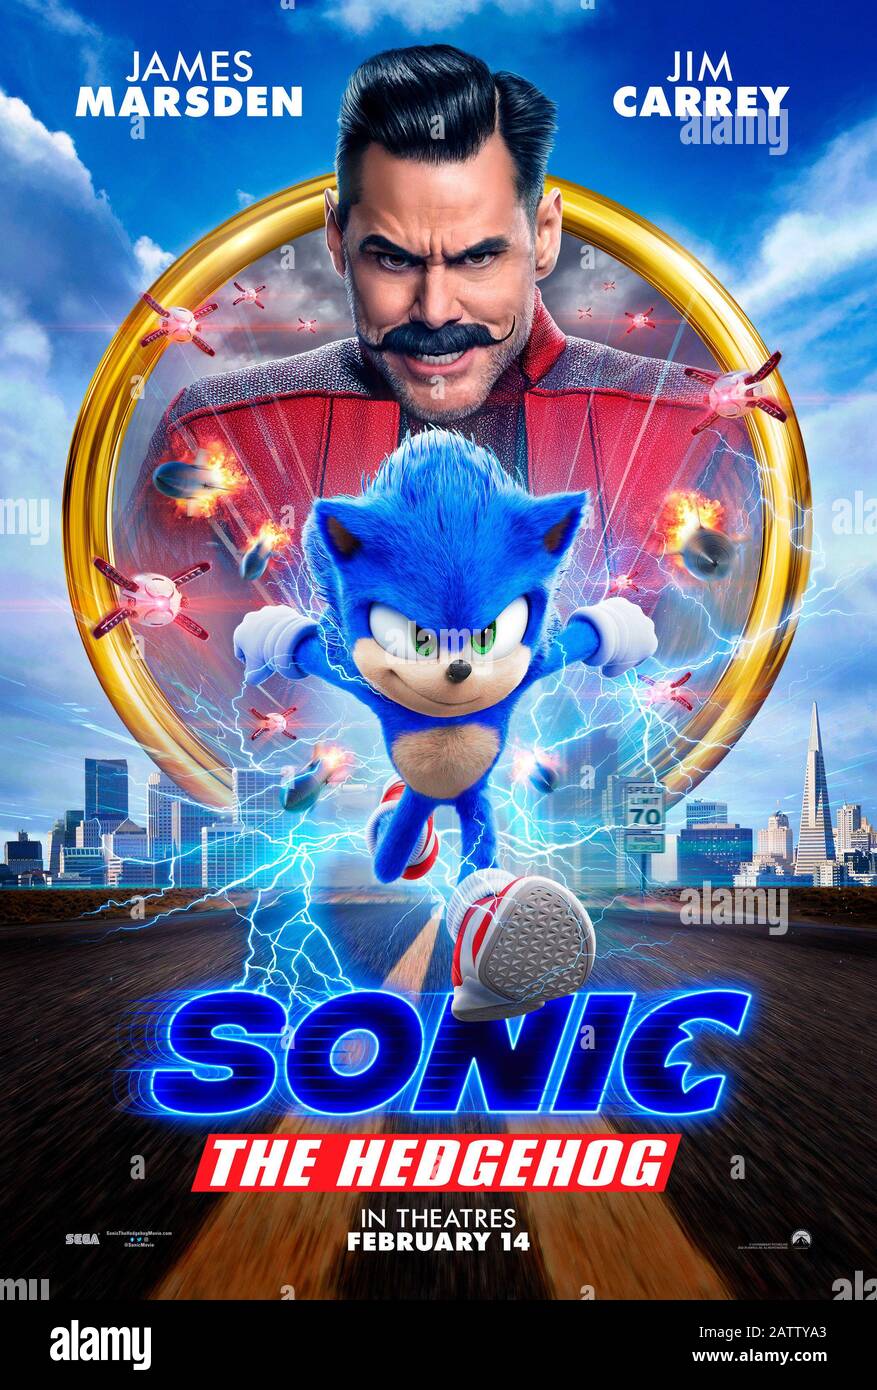 RELEASE DATE: February 14, 2020 TITLE: Sonic The Hedgehog STUDIO: Paramount Pictures DIRECTOR: Jeff Fowler PLOT: After discovering a small, blue, fast hedgehog, a small-town police officer must help it defeat an evil genius who wants to do experiments on it. STARRING: Sonic (voice by Ben Schwartz). (Credit Image: © Paramount Pictures/Entertainment Pictures) Stock Photo